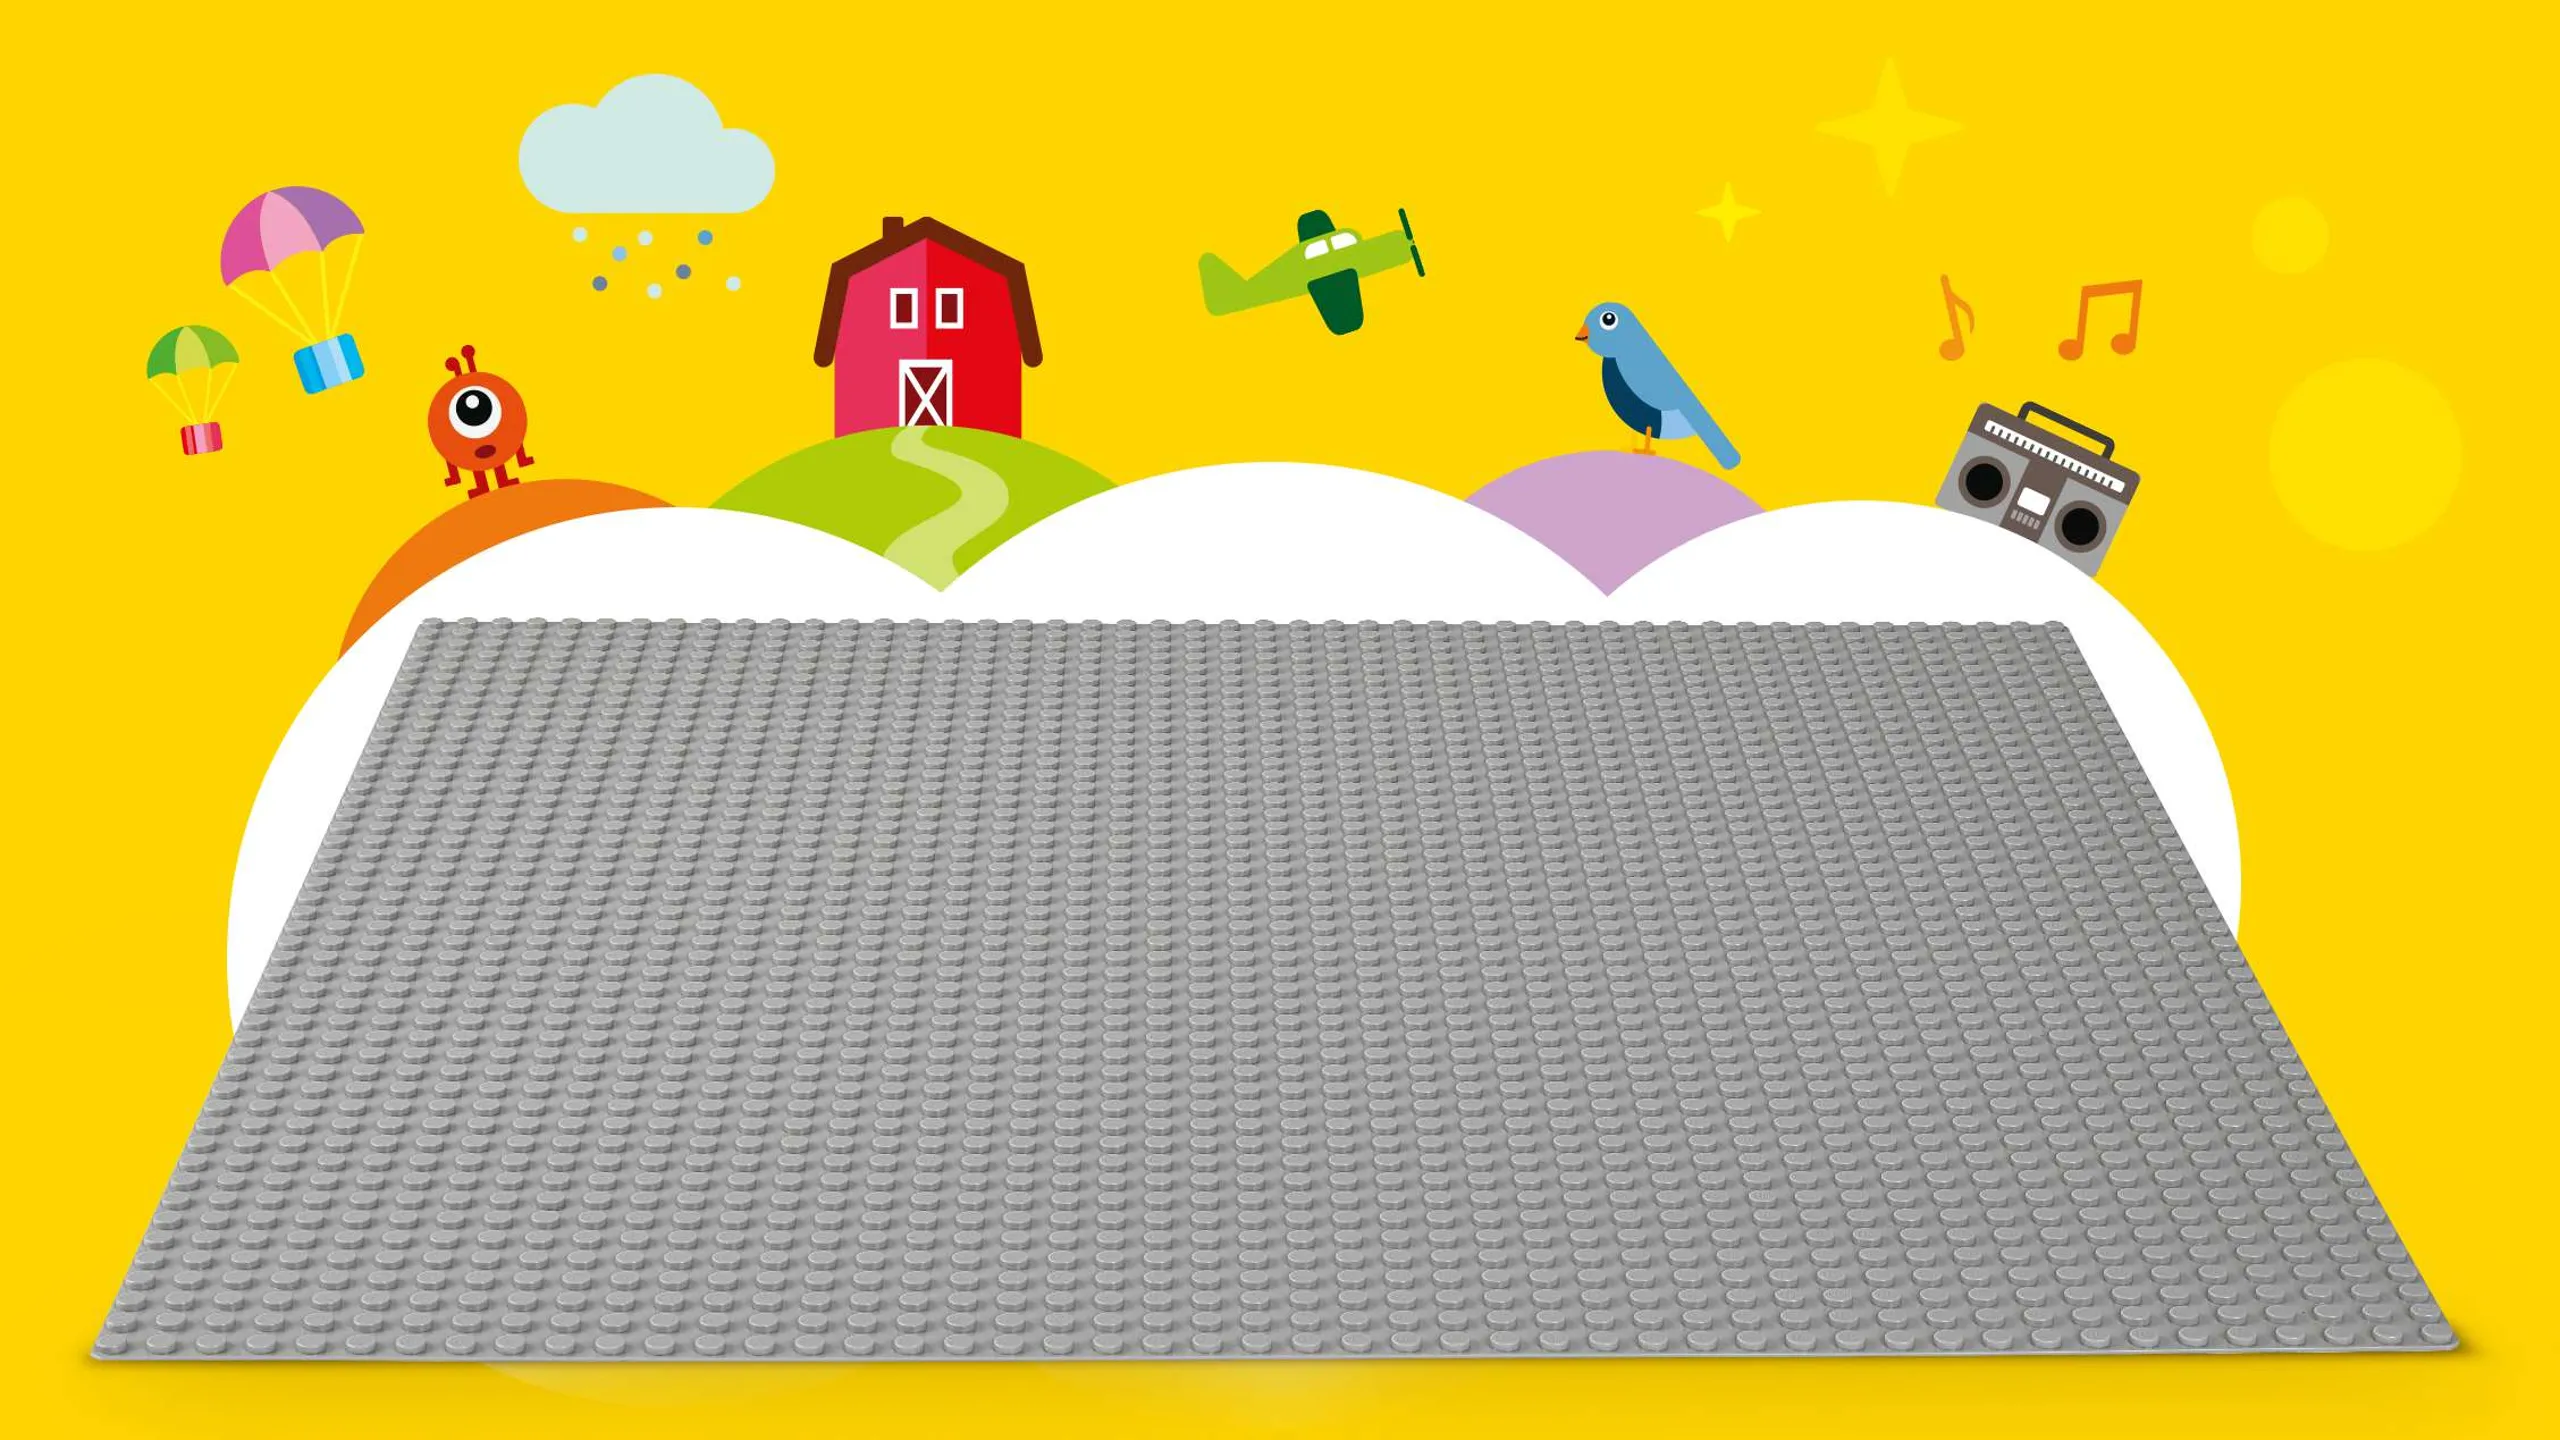 LEGO Classic Grey Base Plate - 10701 - Use this grey LEGO base plate as a foundation for any build you like!